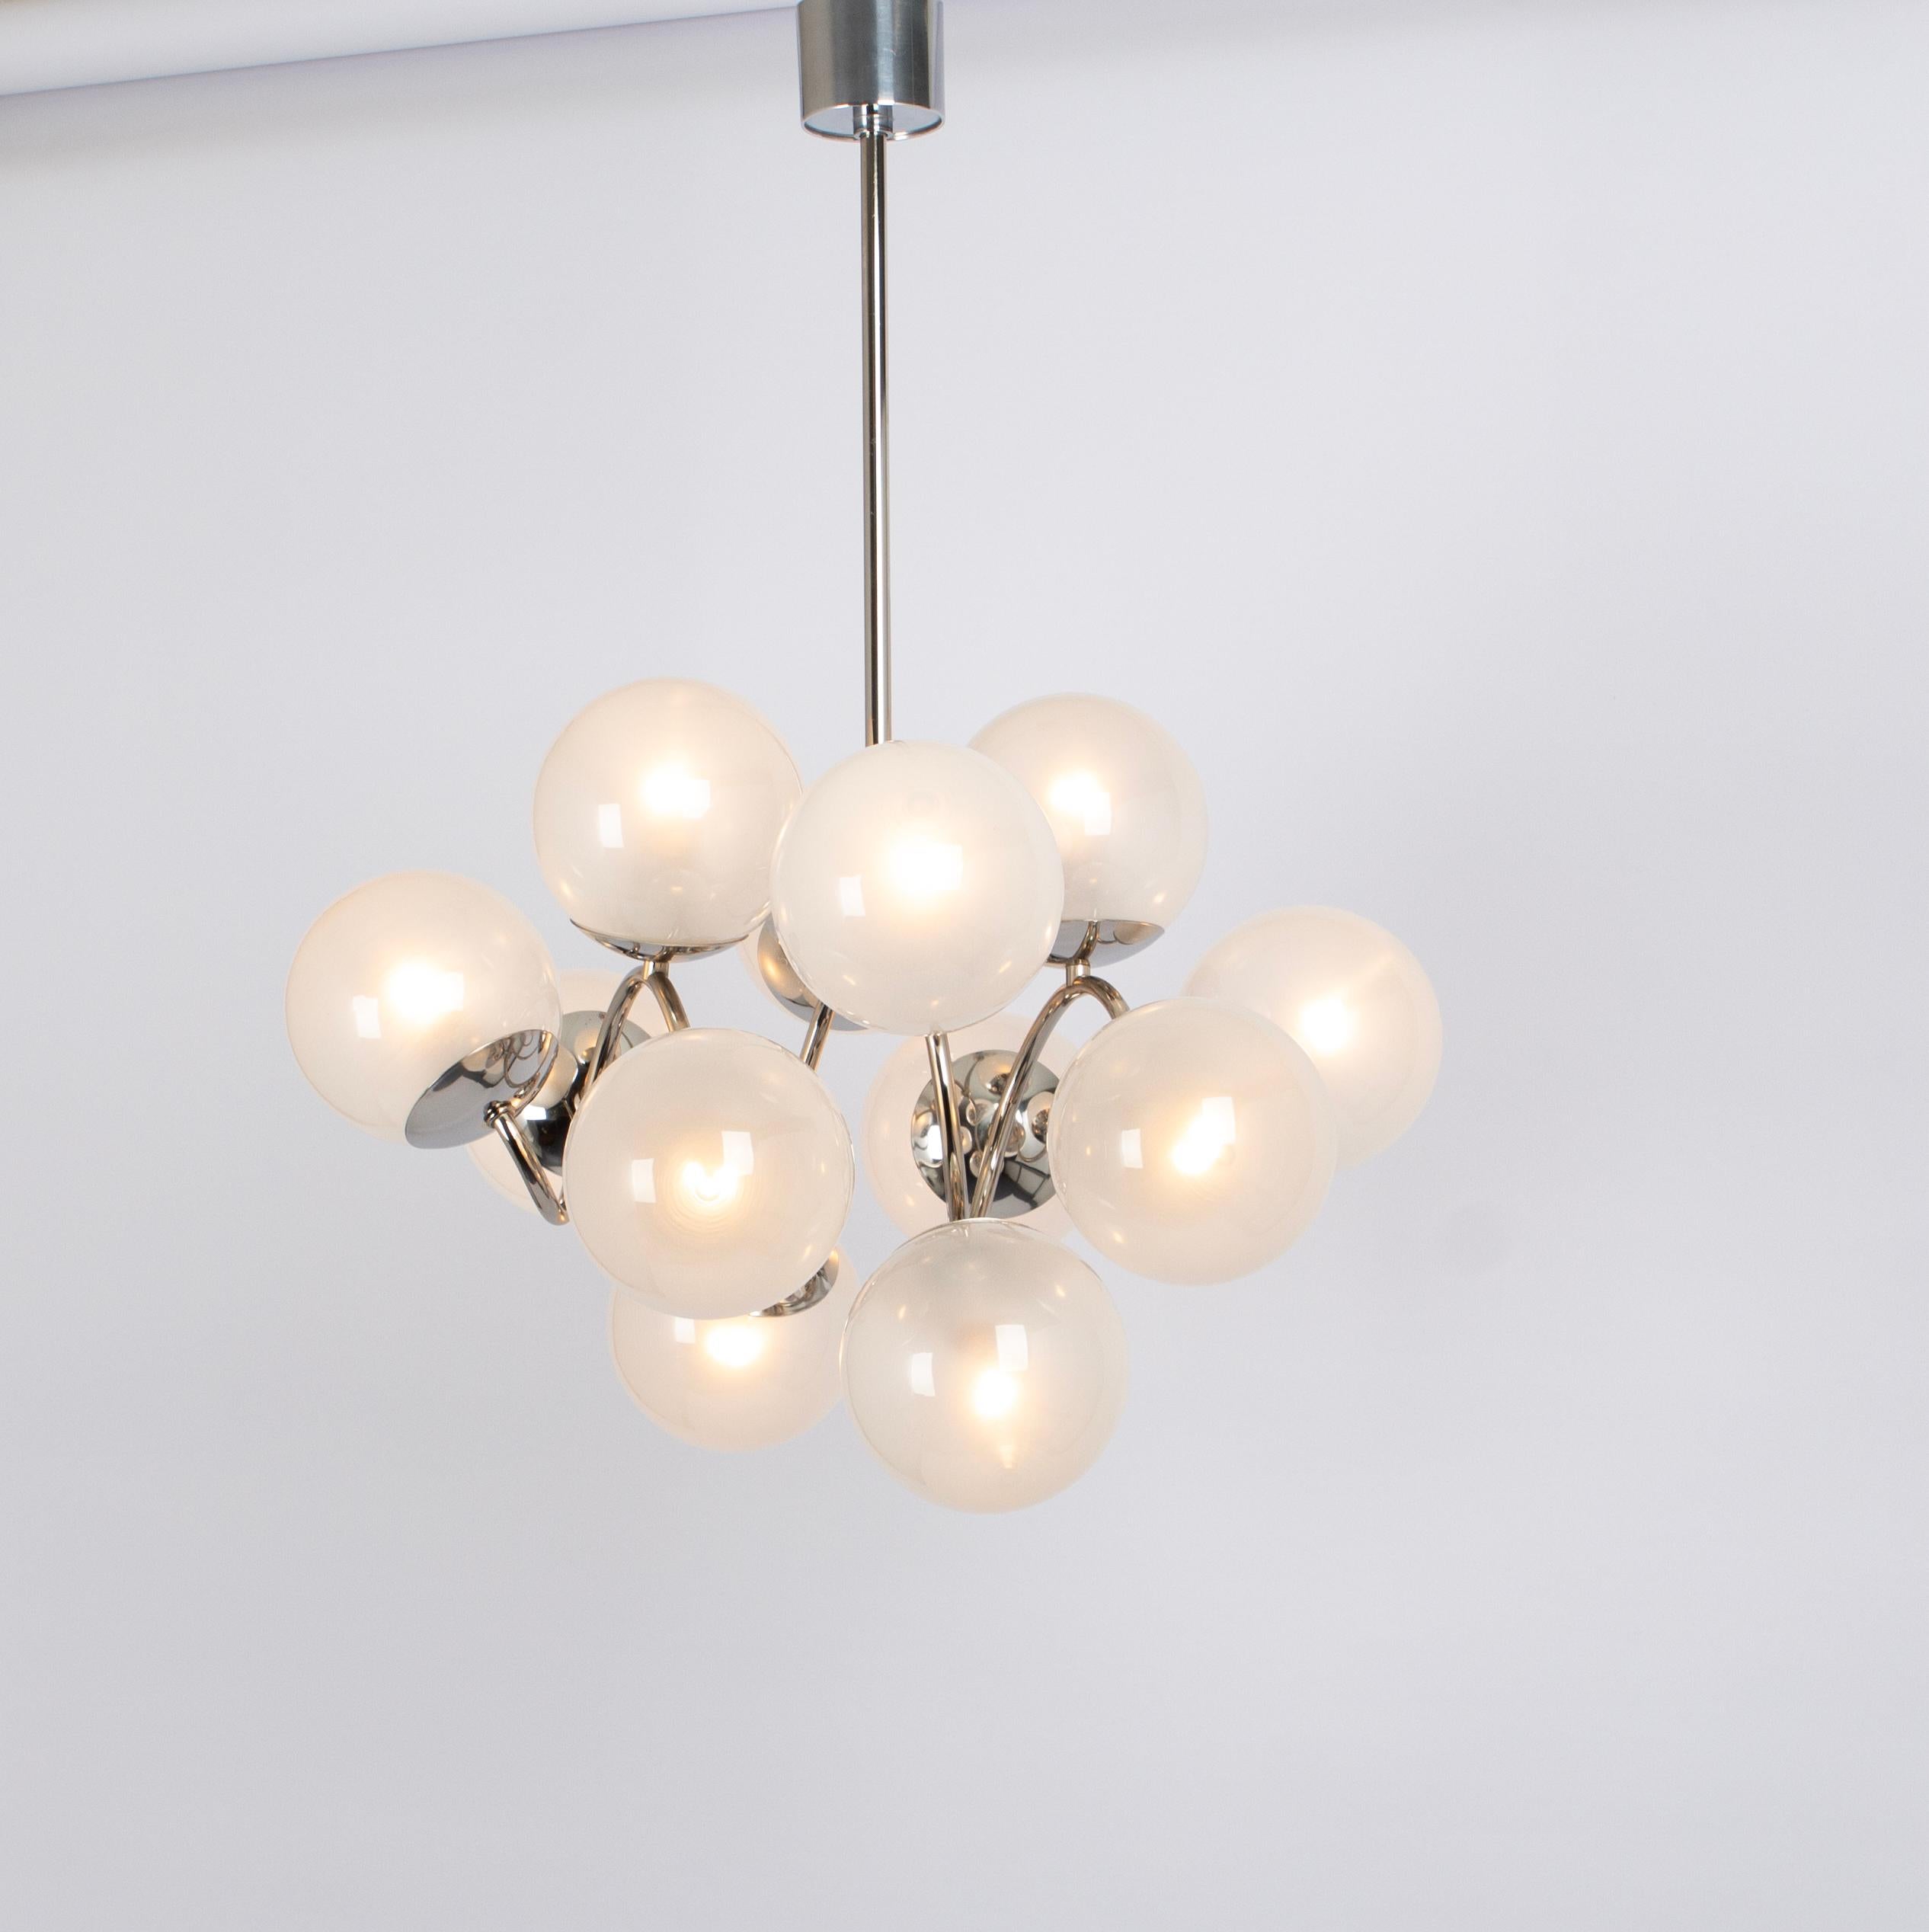 Midcentury vintage chrome pendant made by Kaiser Leuchten, Germany with 12 opal glass balls.
High quality and in very good condition. Cleaned, well-wired and ready to use. 

The fixture requires 12 x E14 small bulbs with 40W max each.
Light bulbs